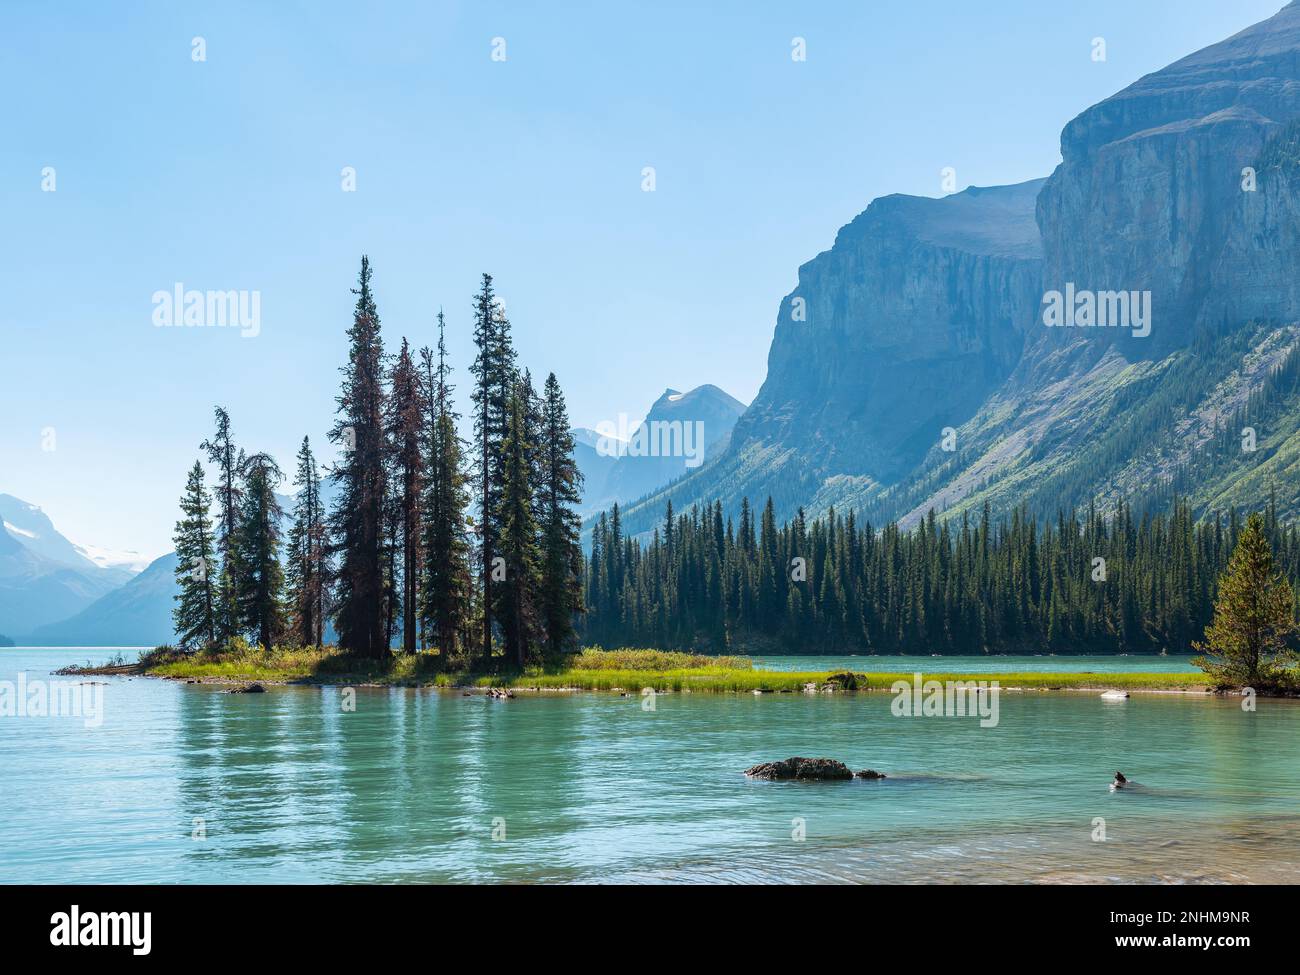 Spirit Island and Maligne Lake in summer with copy space, national park, Alberta, Canada. Stock Photo